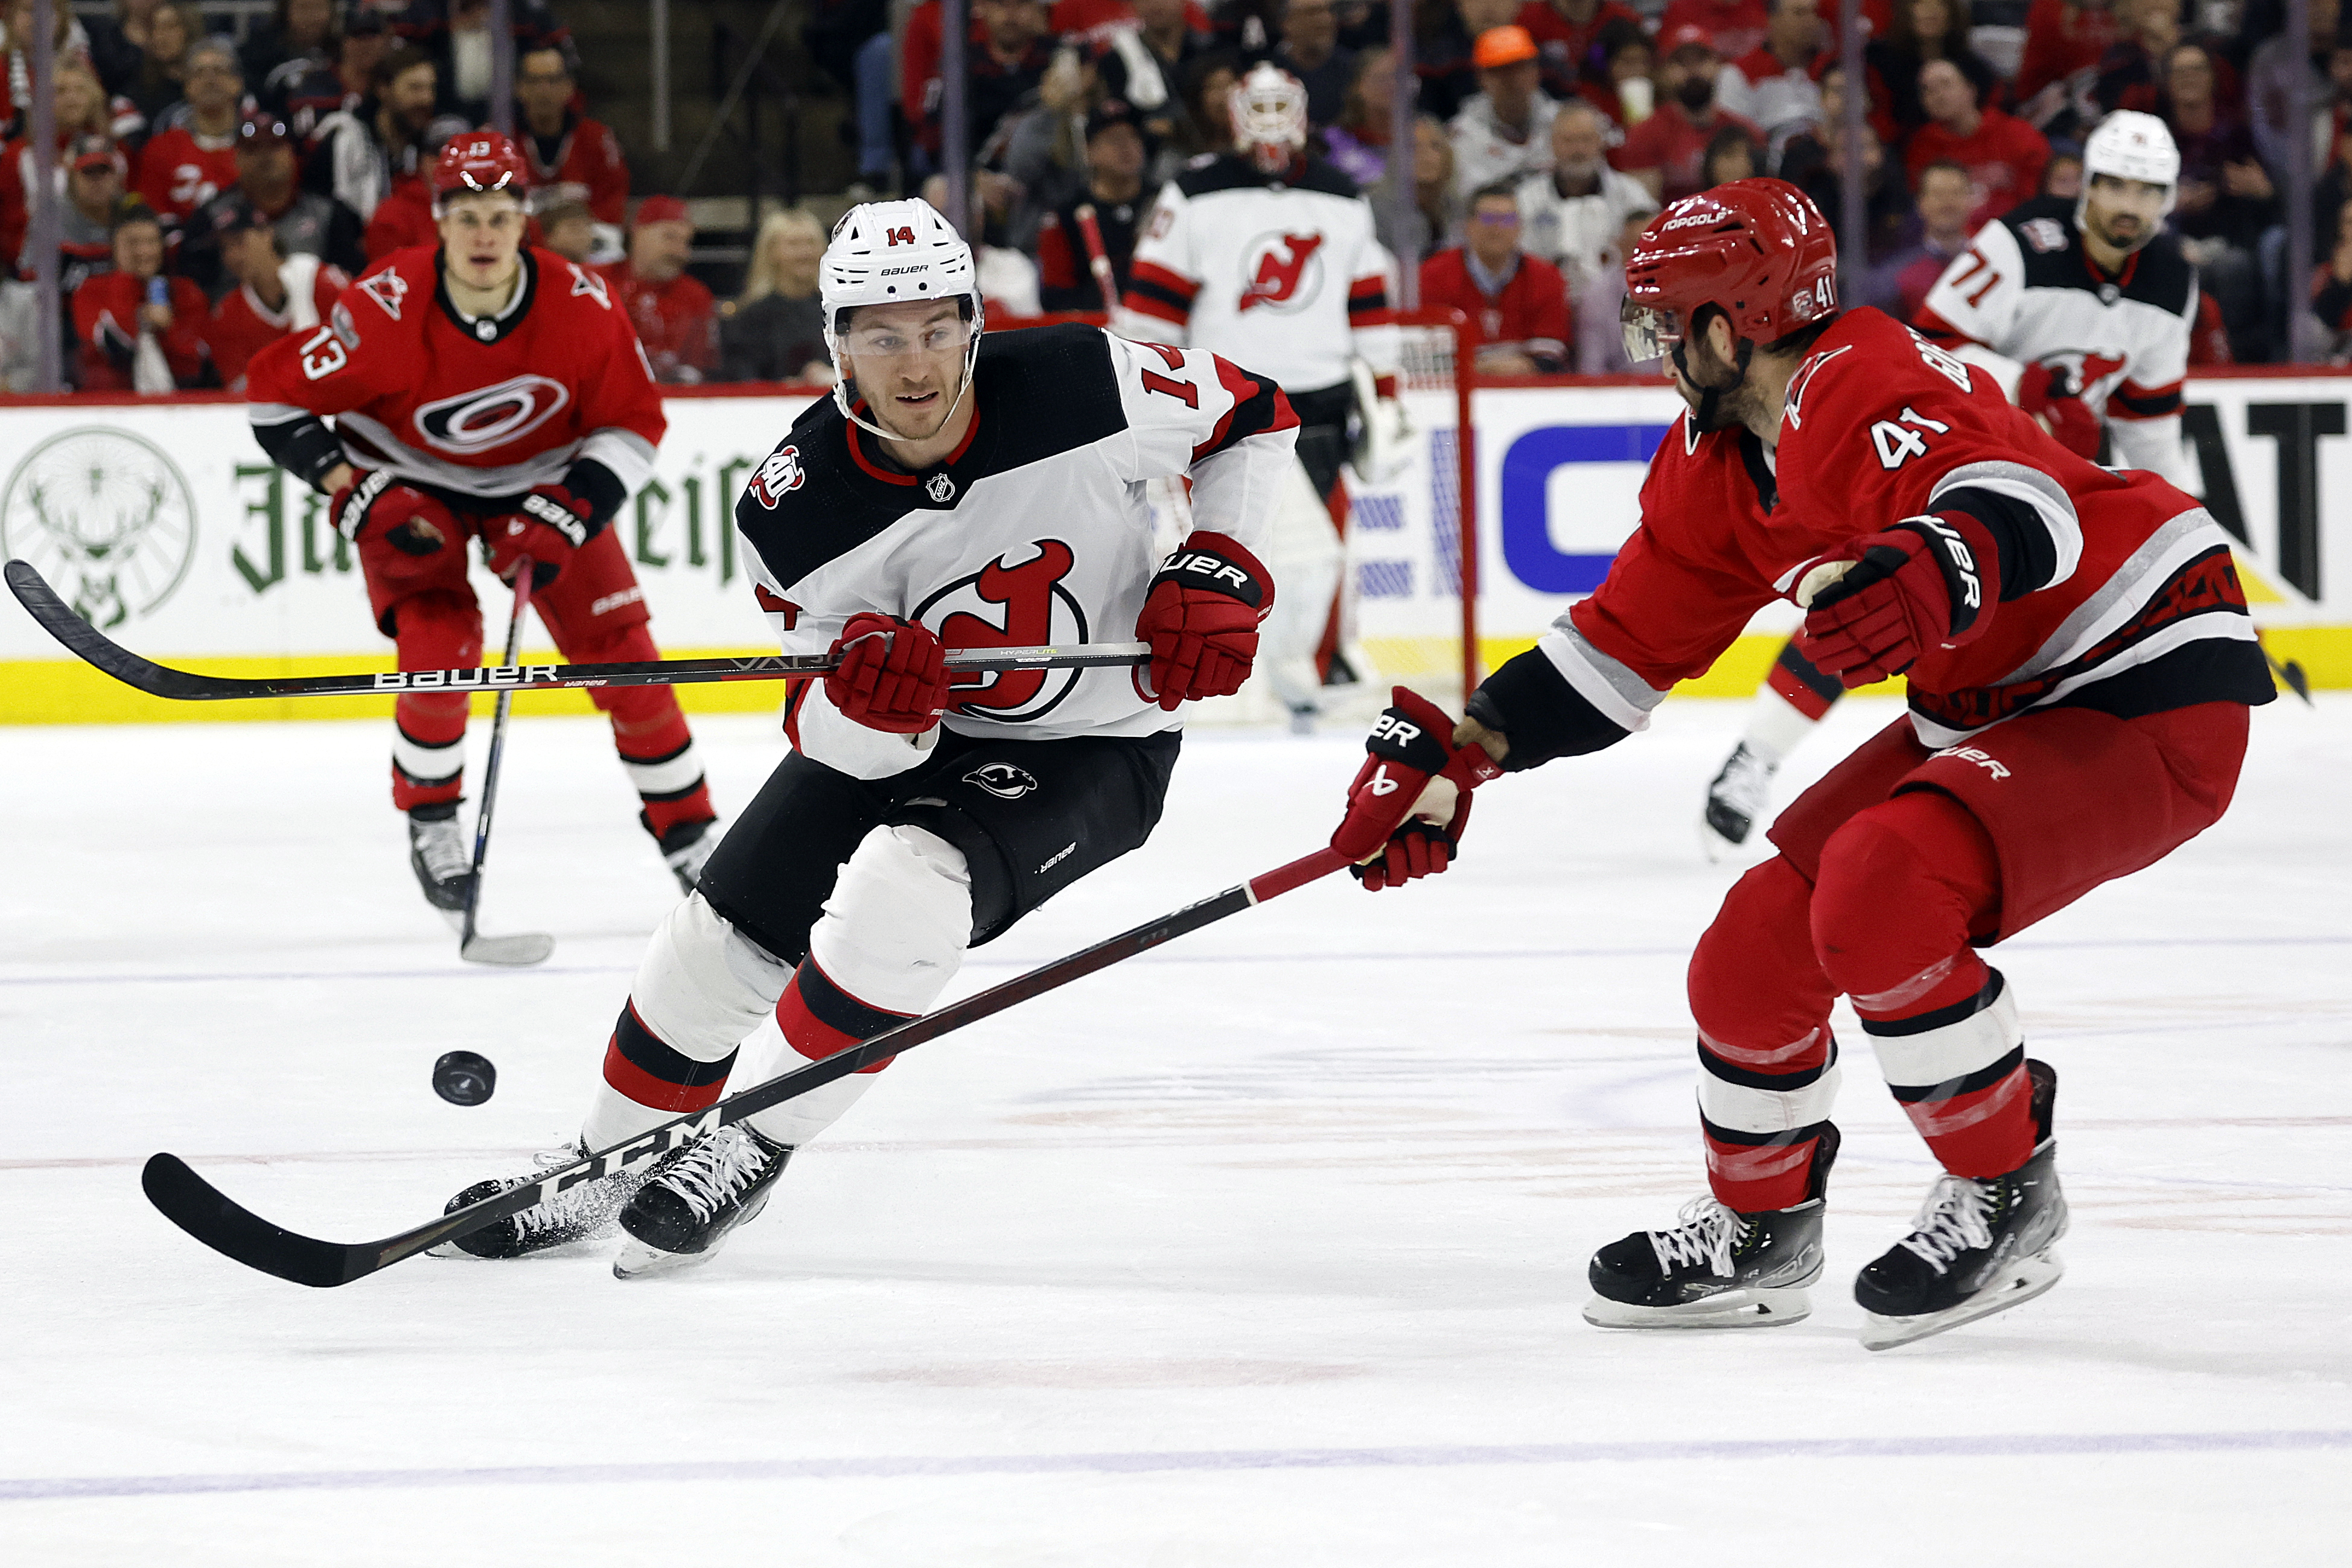 New Jersey Devils vs. Carolina Hurricanes: How to watch Stanley